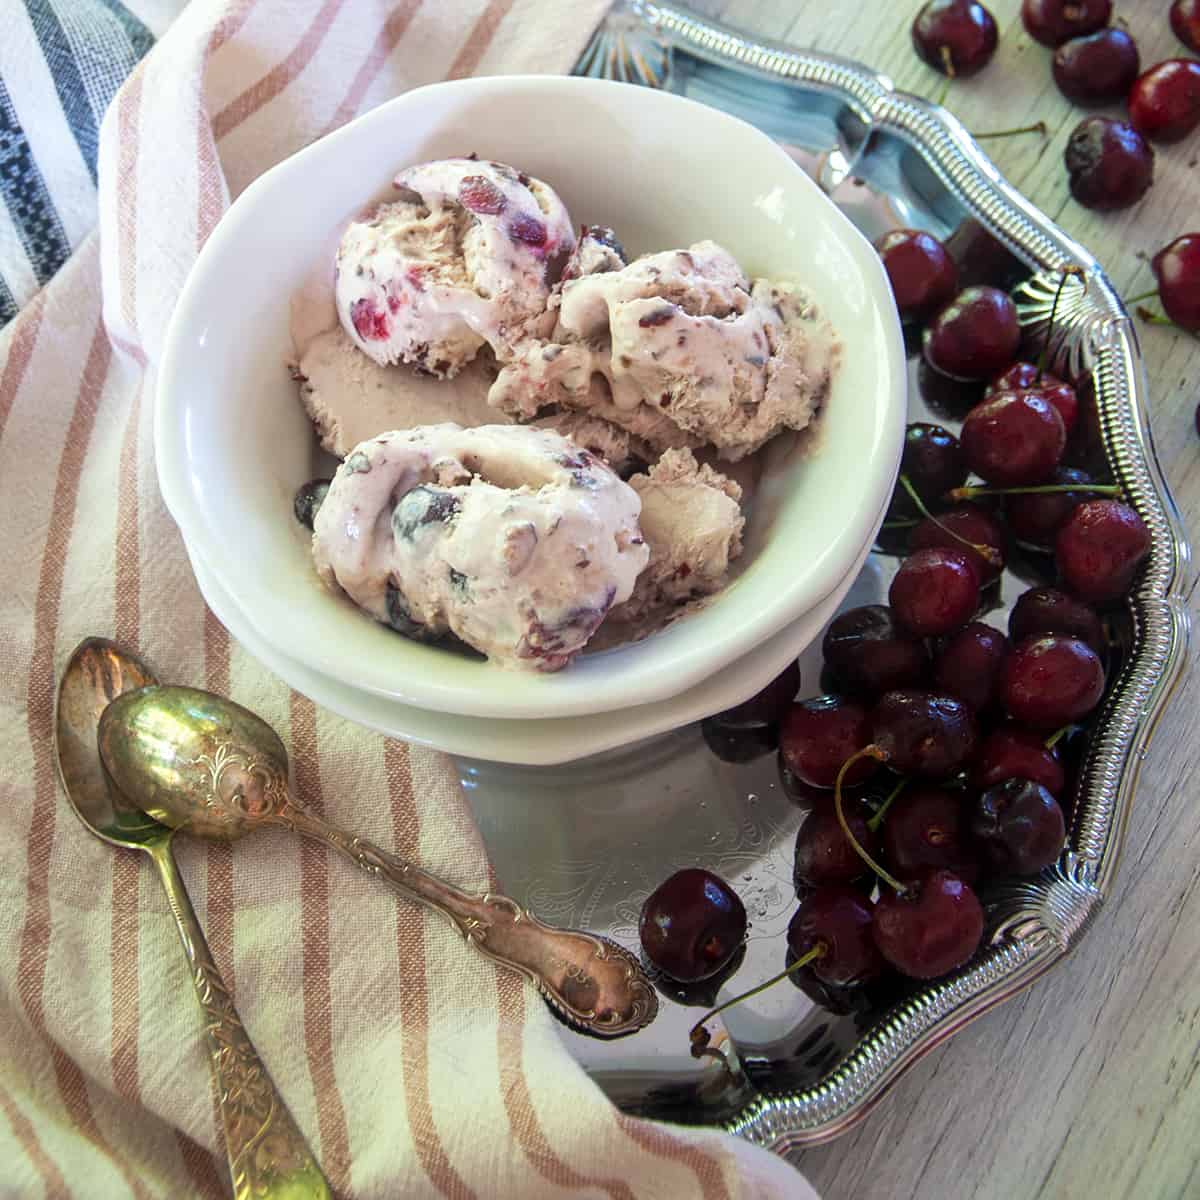 One bowl of black cherry ice cream on a silver platter that is covered in fresh cherries.